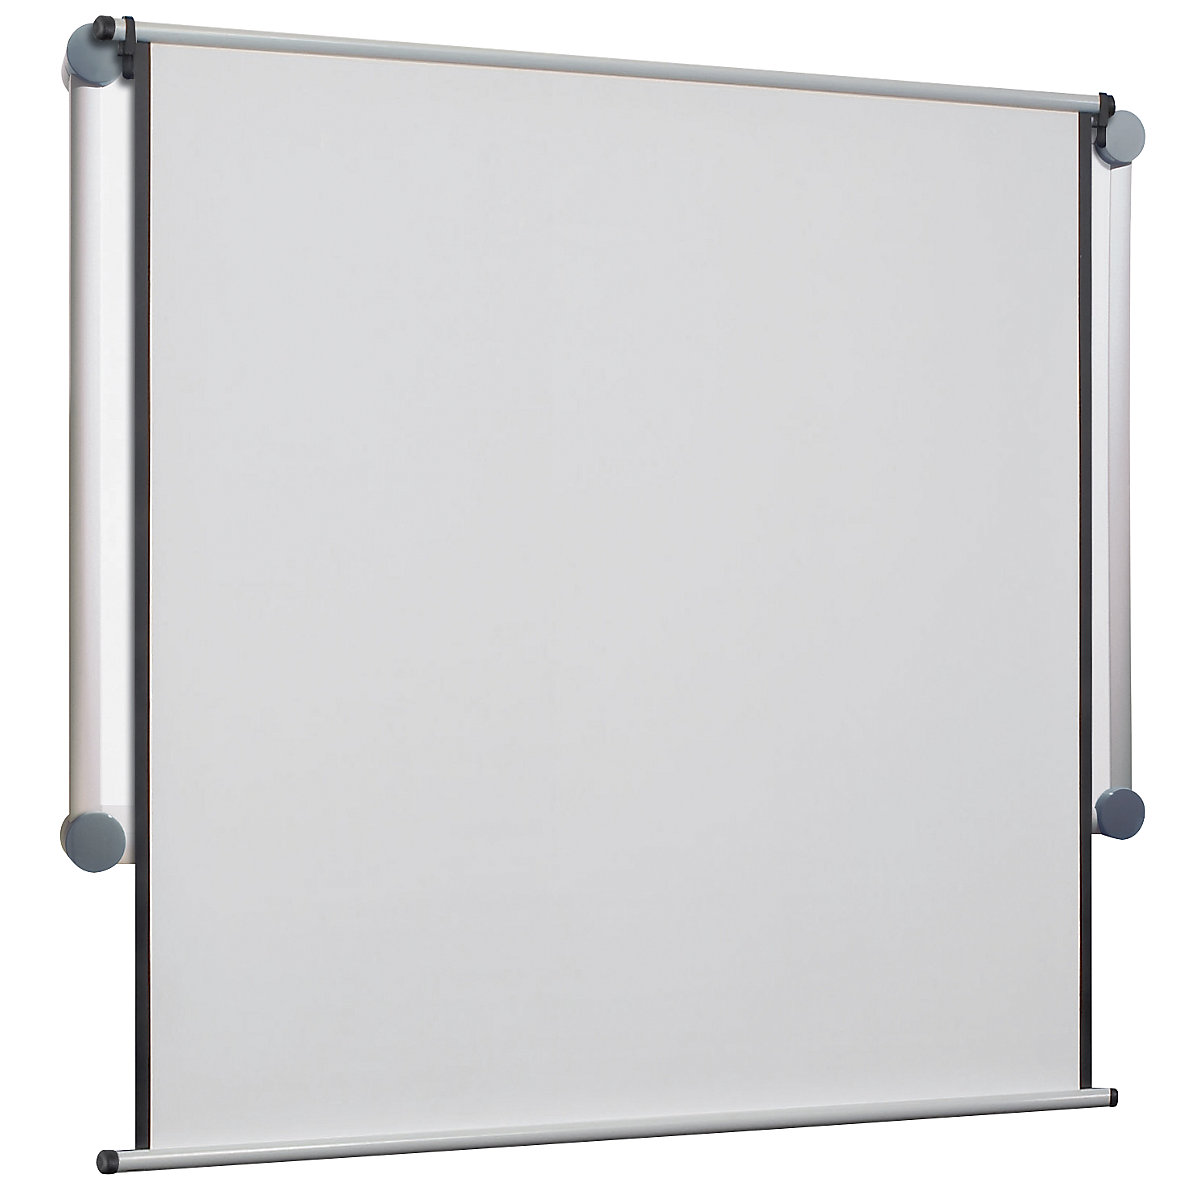 Projection screen – MAUL